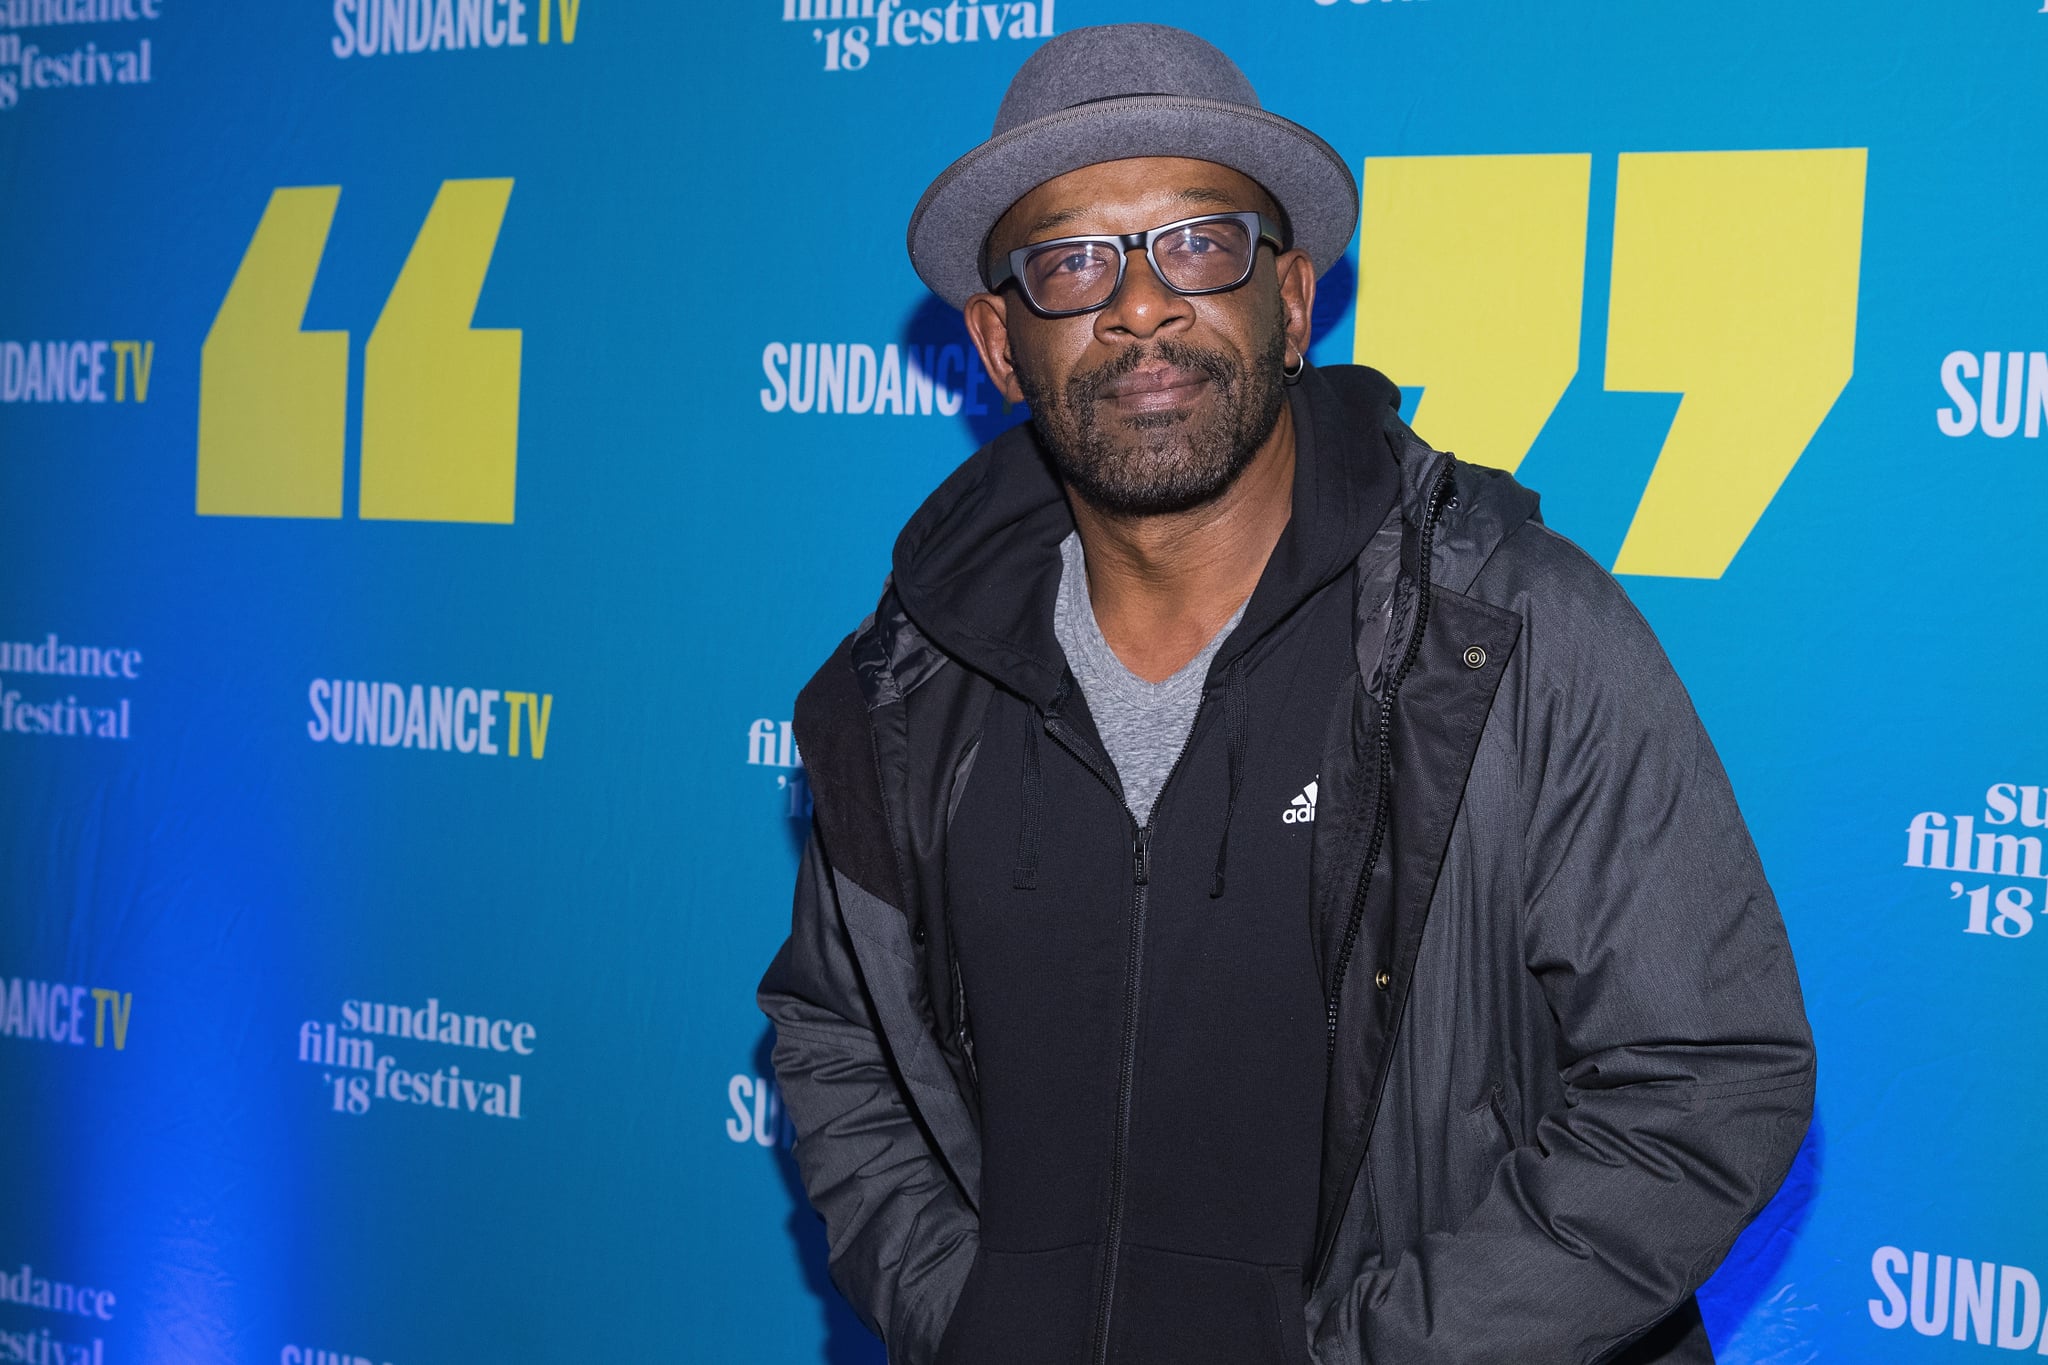 PARK CITY, UT - JANUARY 19:  Actor Lennie James attends the 2018 Sundance Film Festival Official Kickoff Party